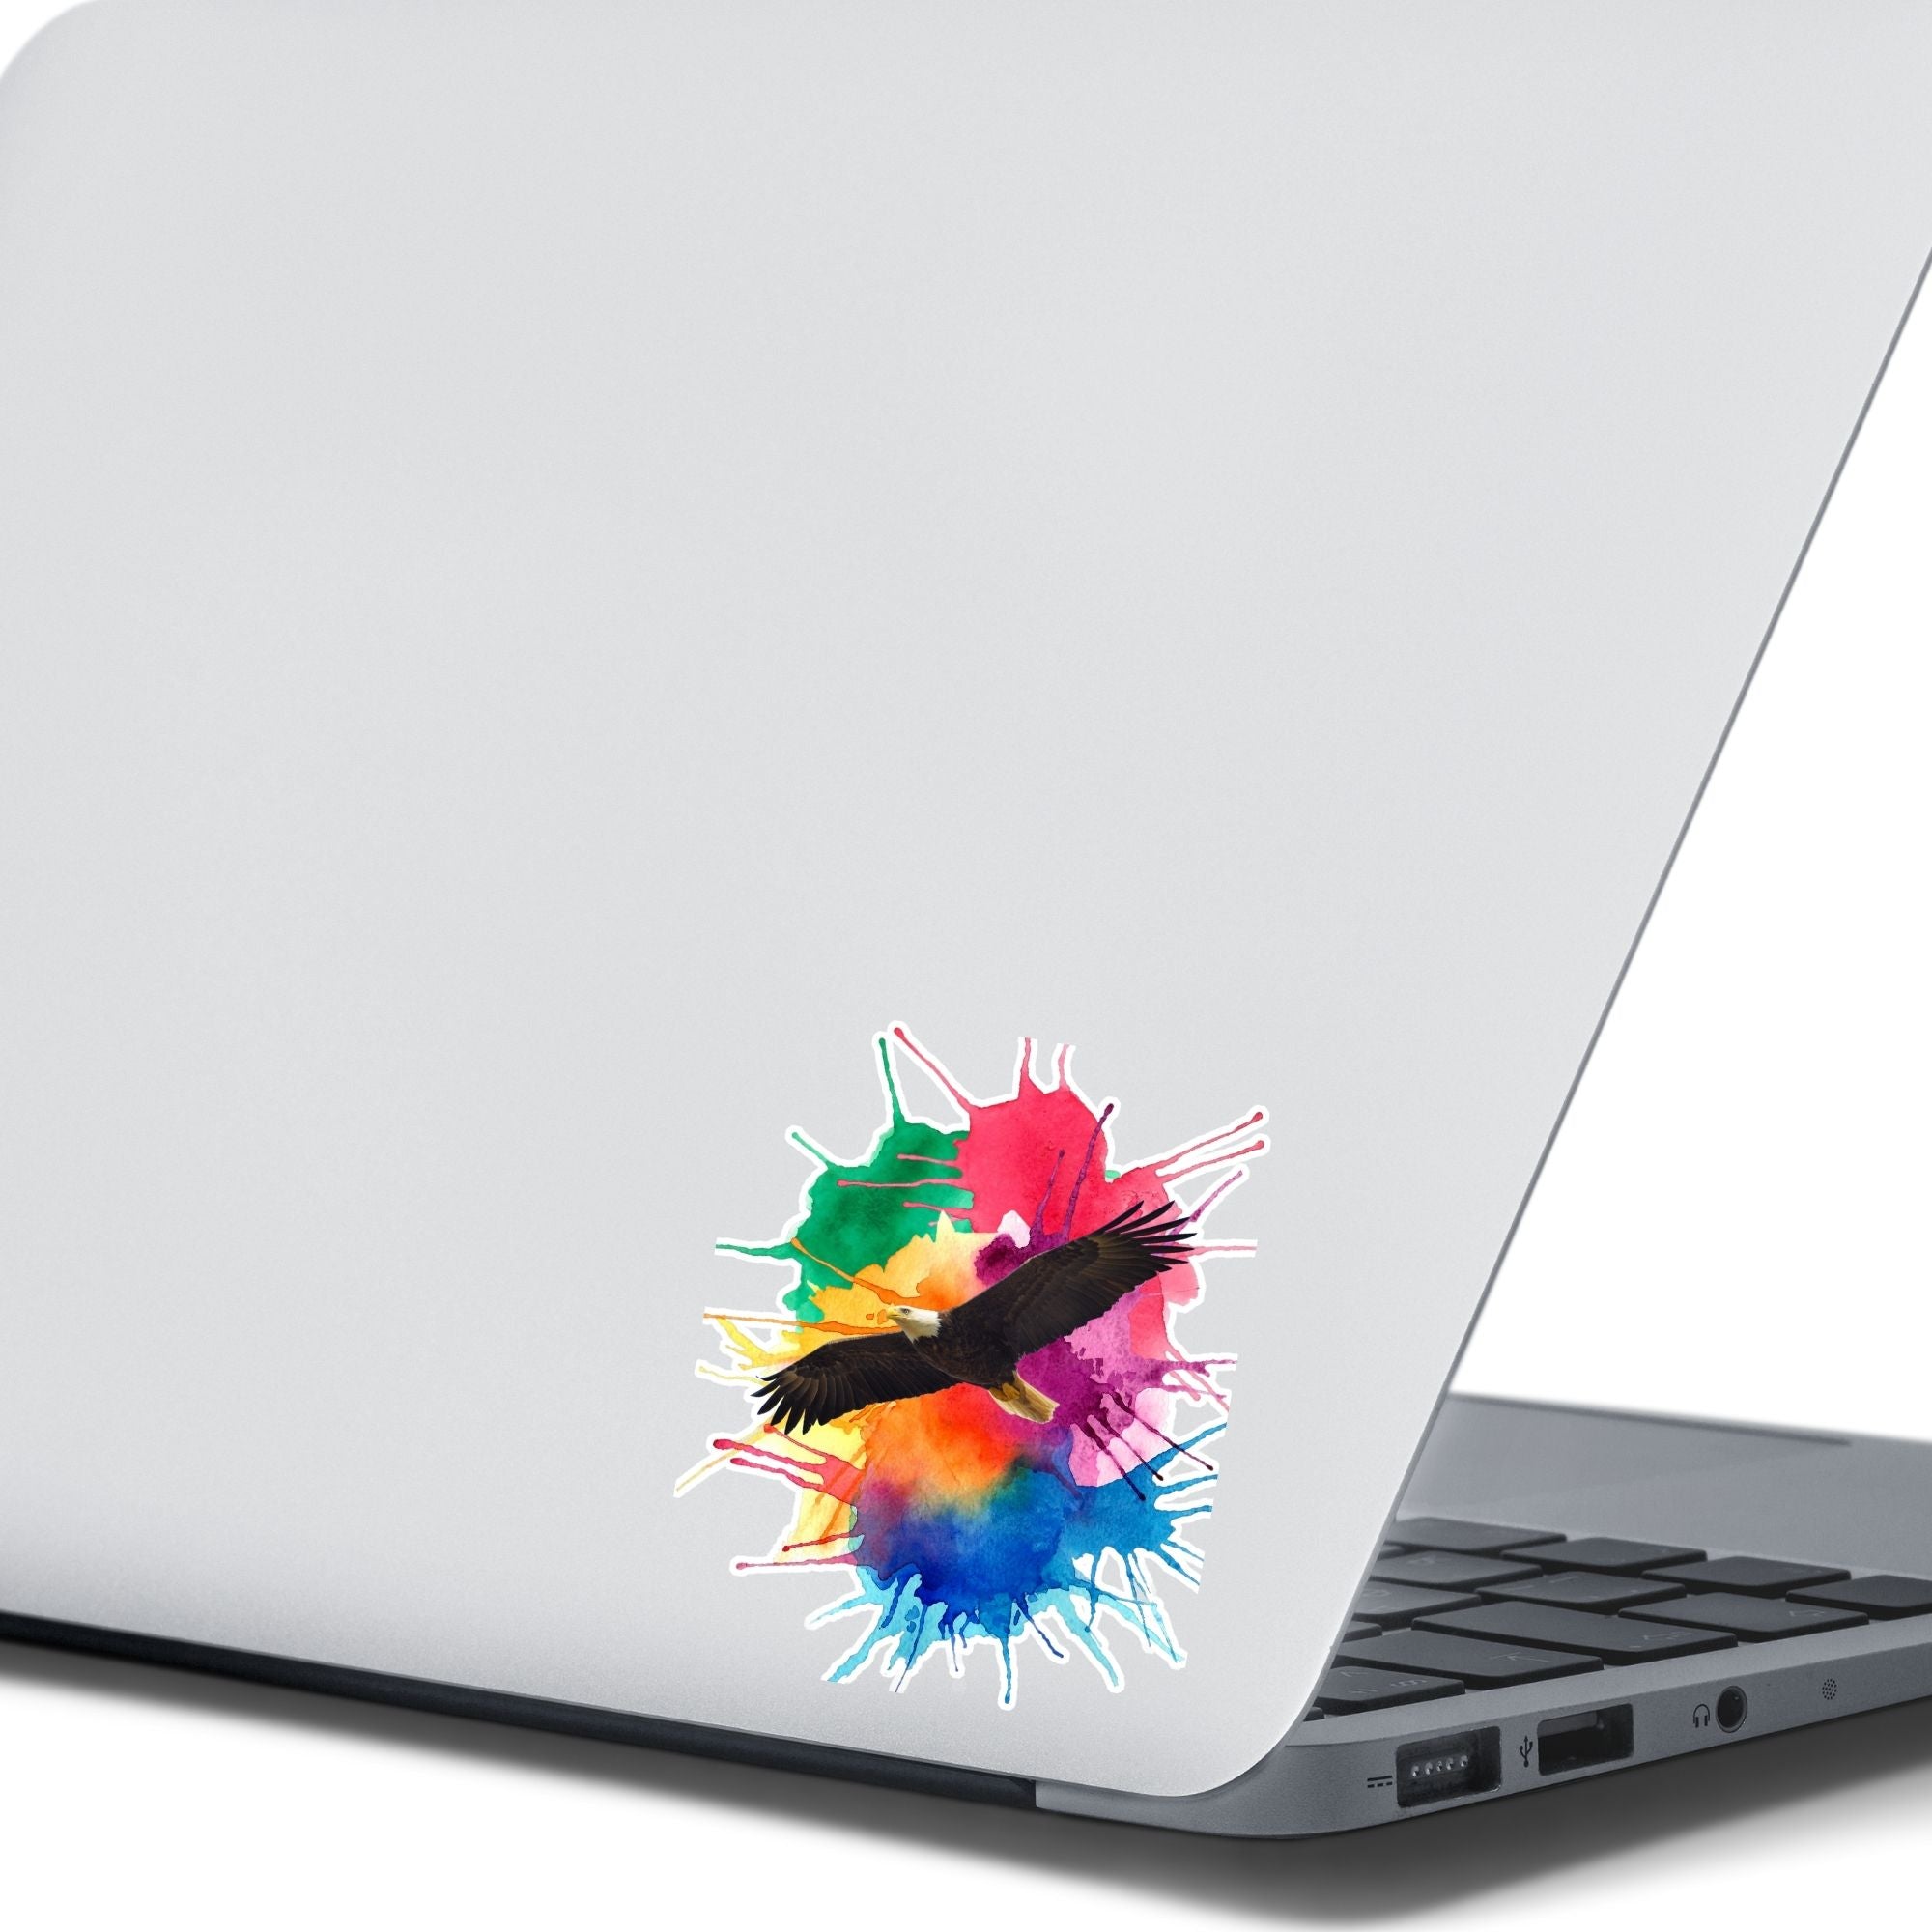 Soar with Eagles! This individual die-cut sticker features a majestic eagle soaring over a paint splash background. This image shows the Soaring Eagle sticker on the back of an open laptop.